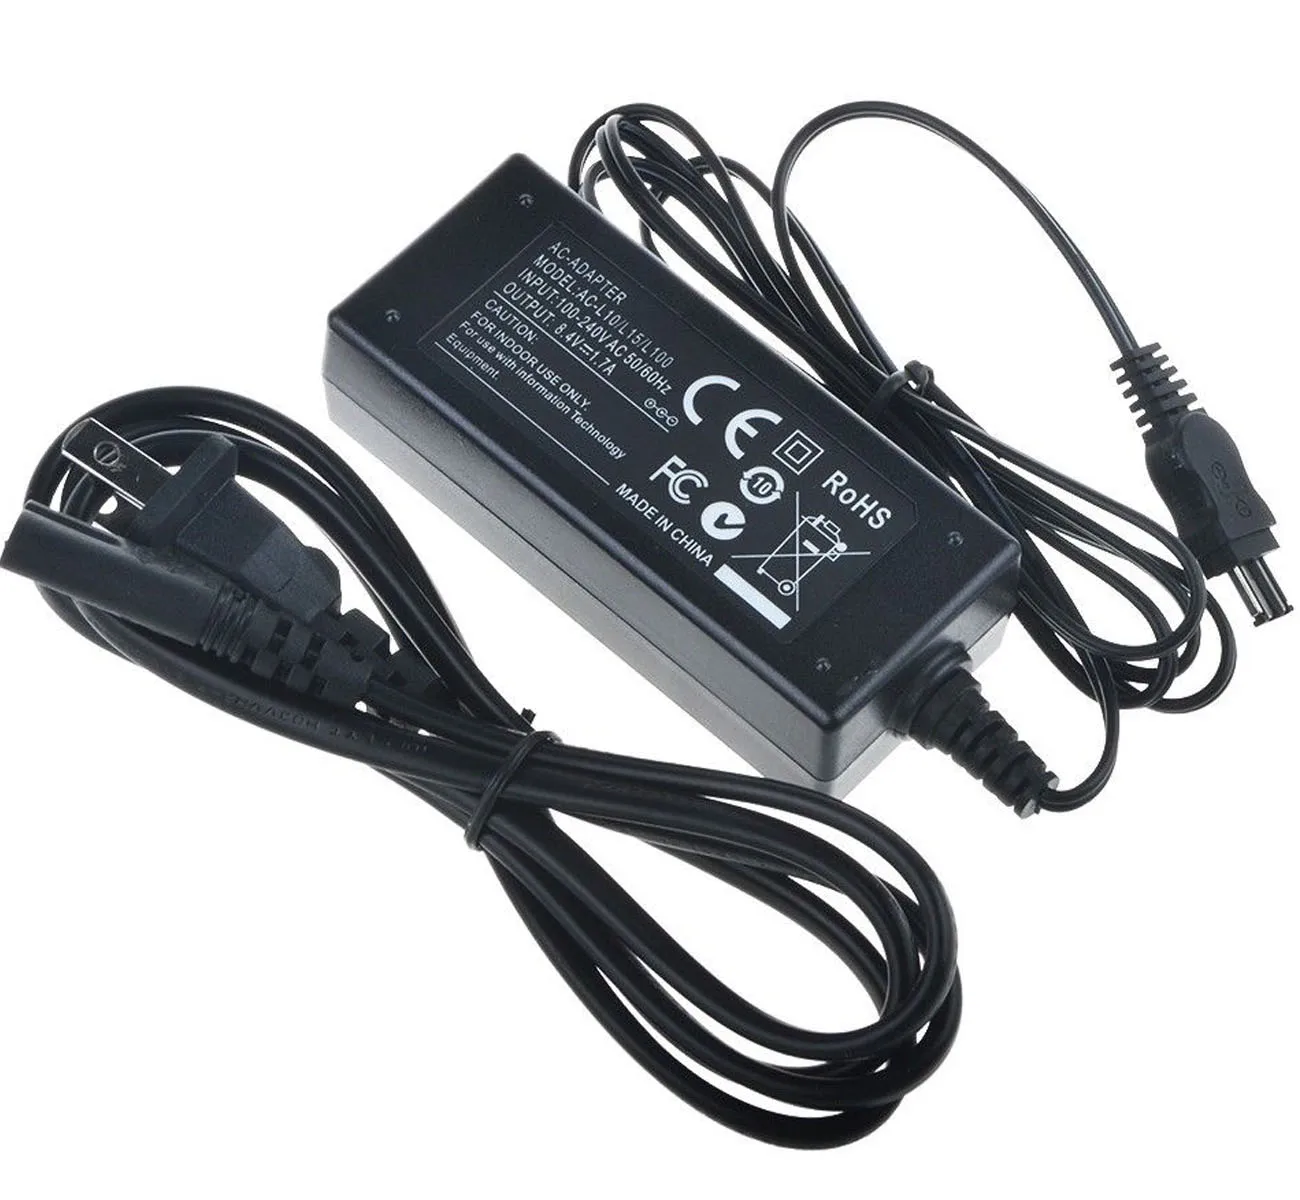 AC Power Adapter Charger for Sony DCR TRV14E, DCR TRV15E, DCR TRV16E, DCR  TRV17E, DCR TRV18E, DCR TRV19E Handycam Camcorder|Camera Charger| -  AliExpress